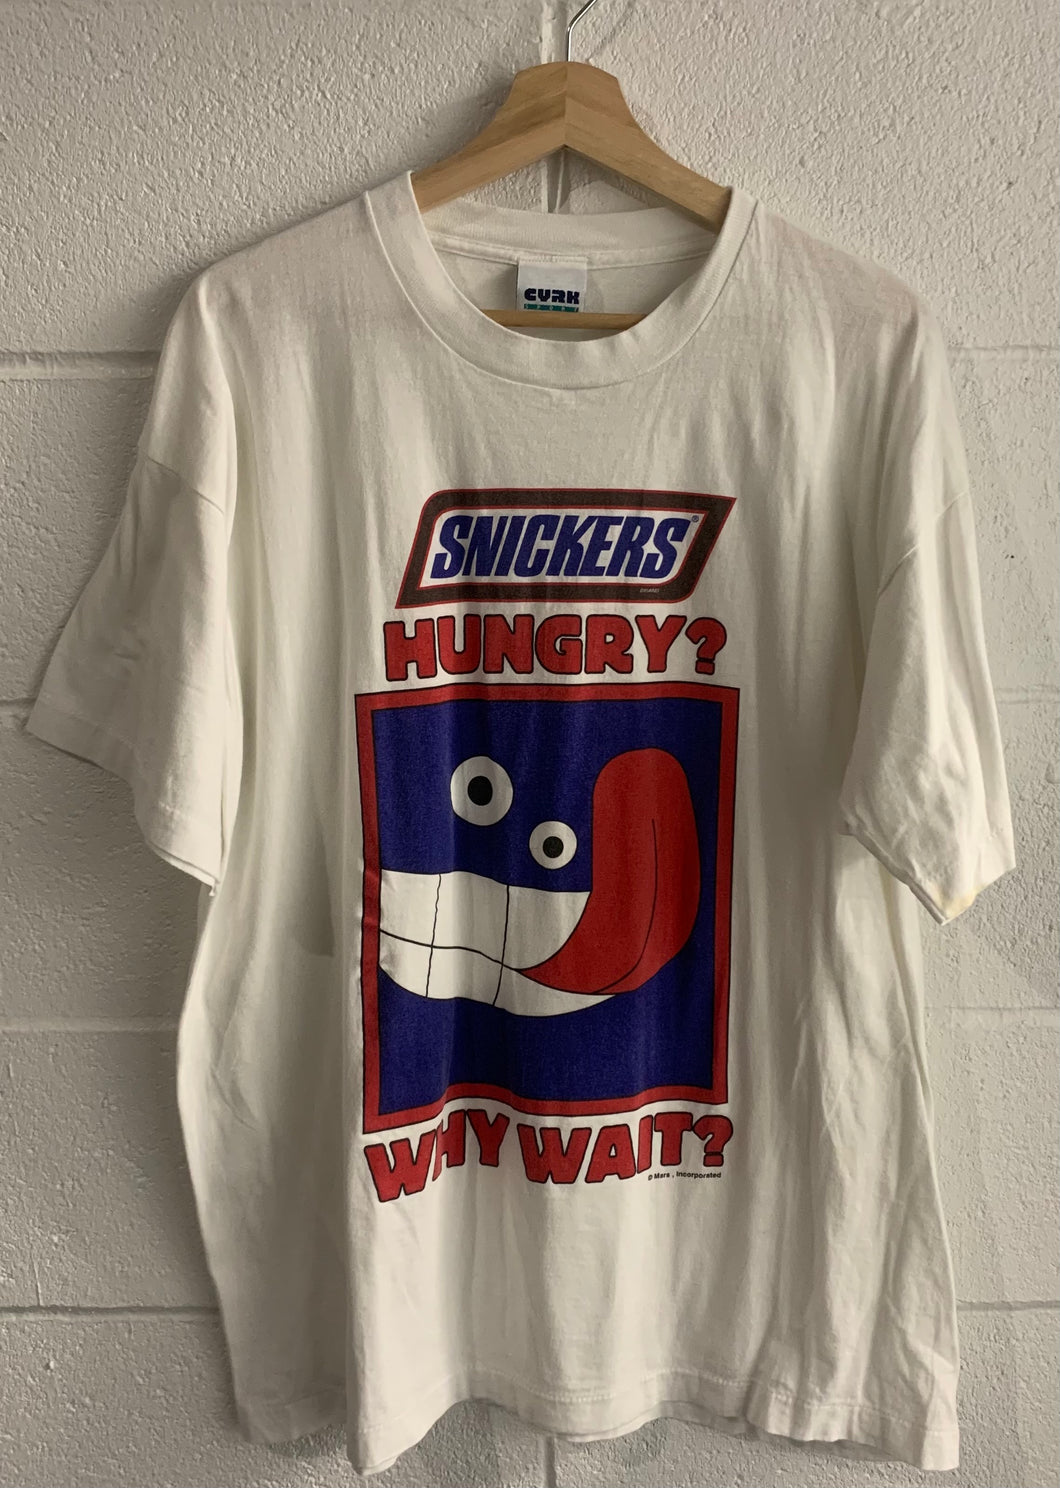 90s Snickers Why wait? Tee shirt